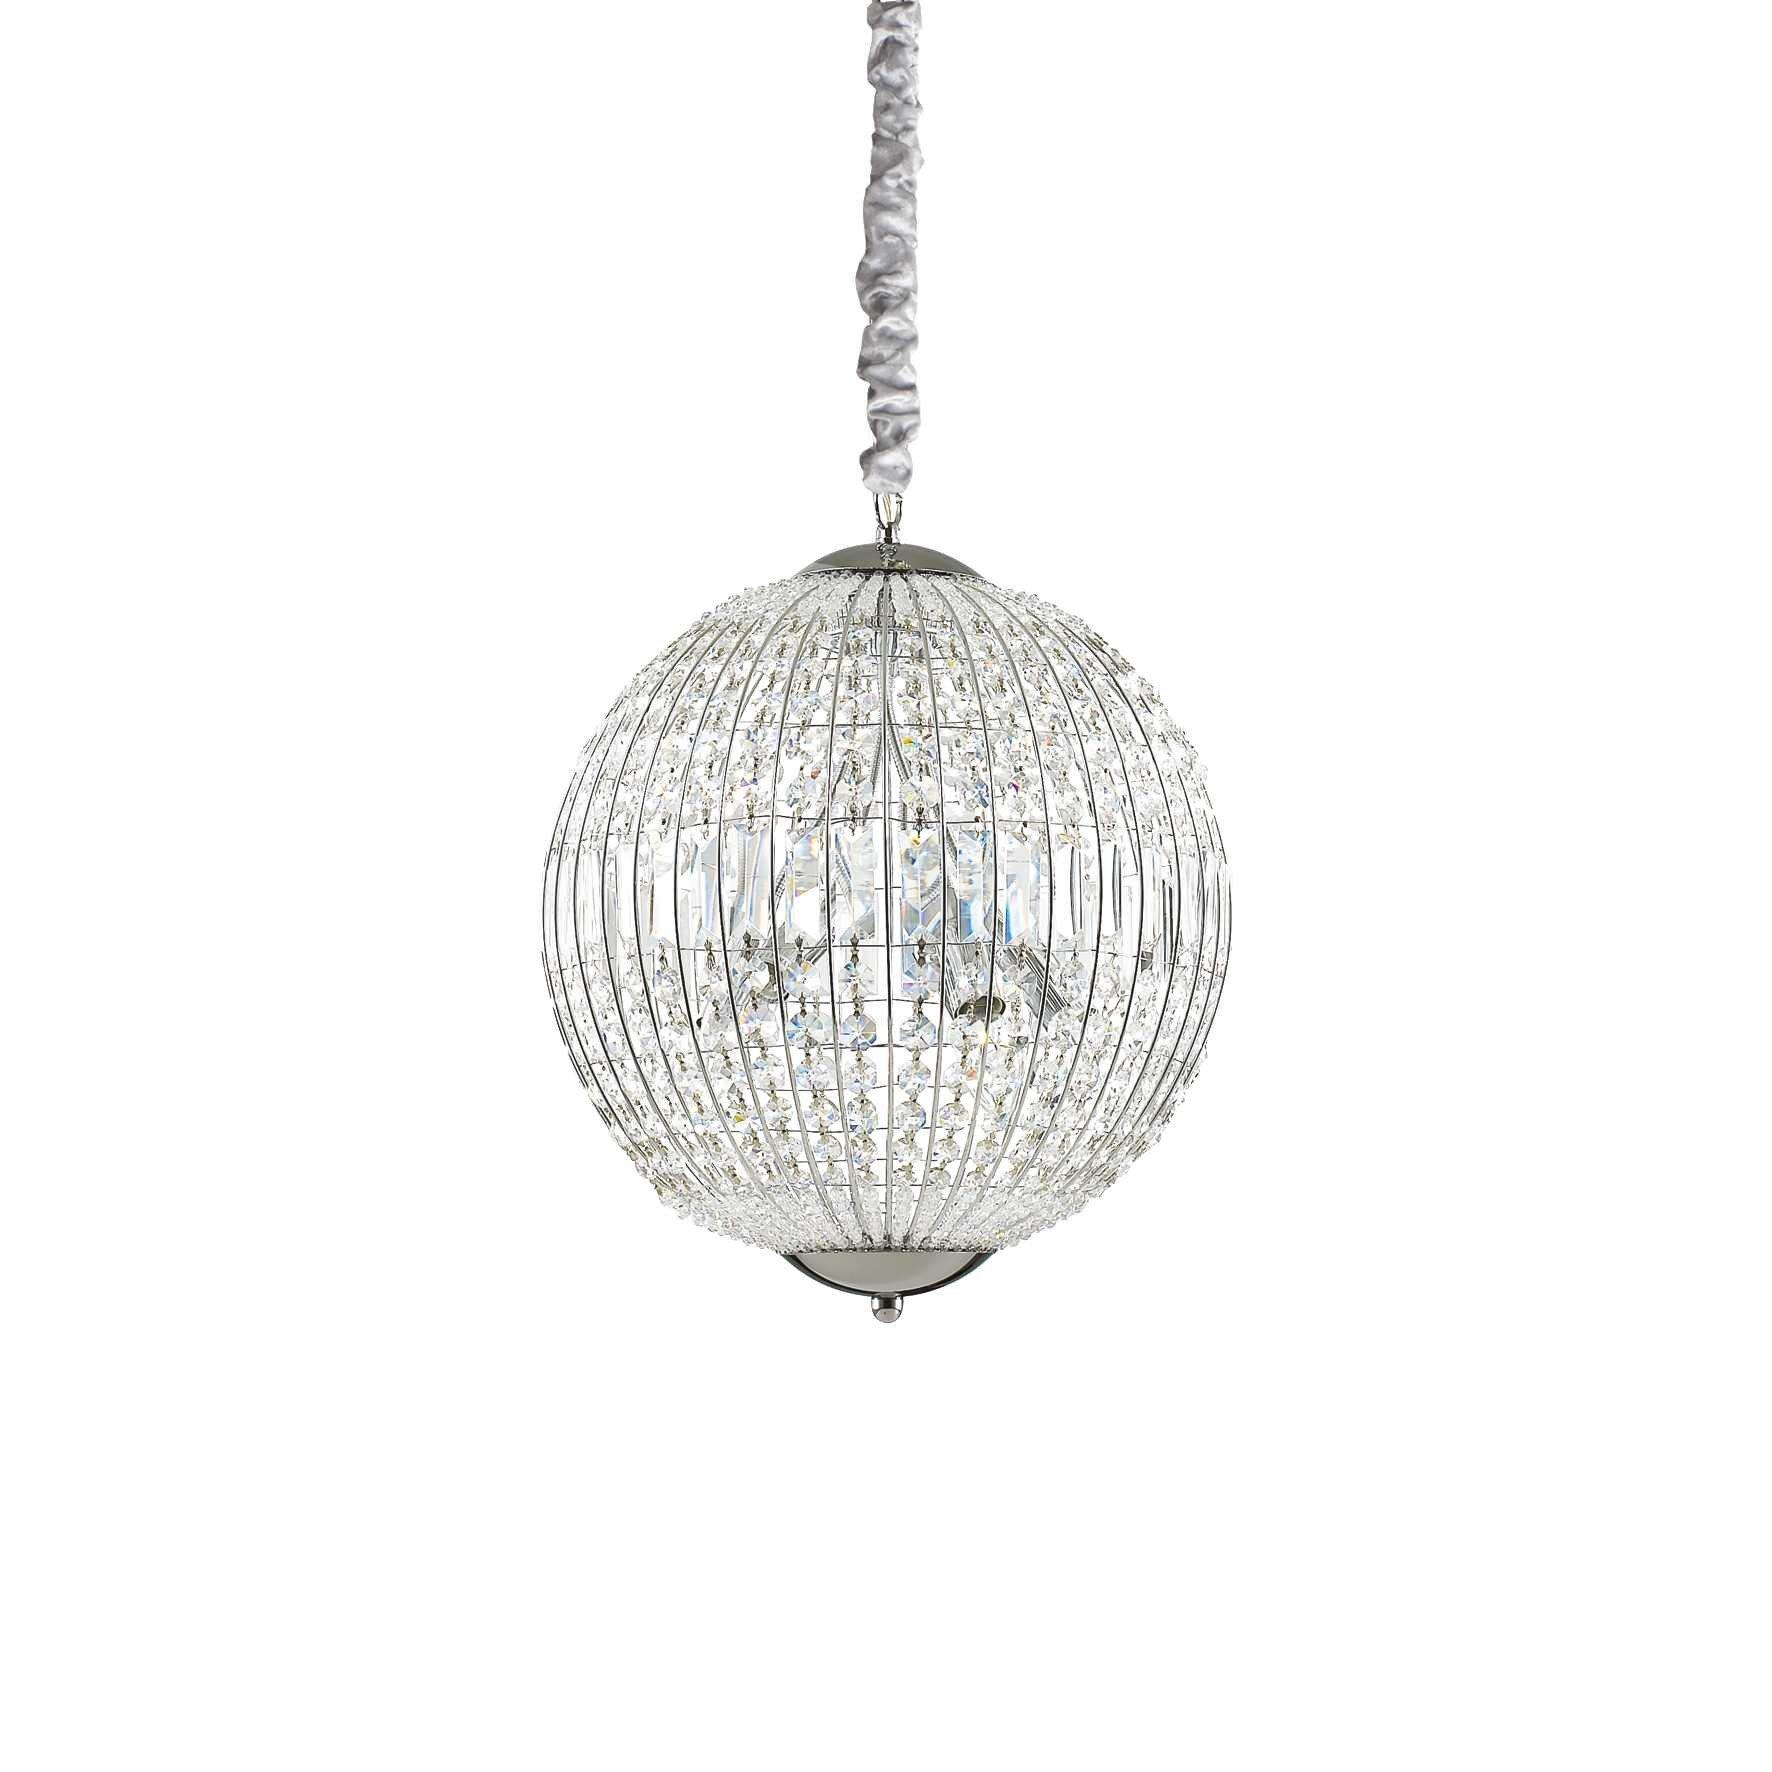 Luxor 6 Light Small Ceiling Pendant Chrome with Crystals G9